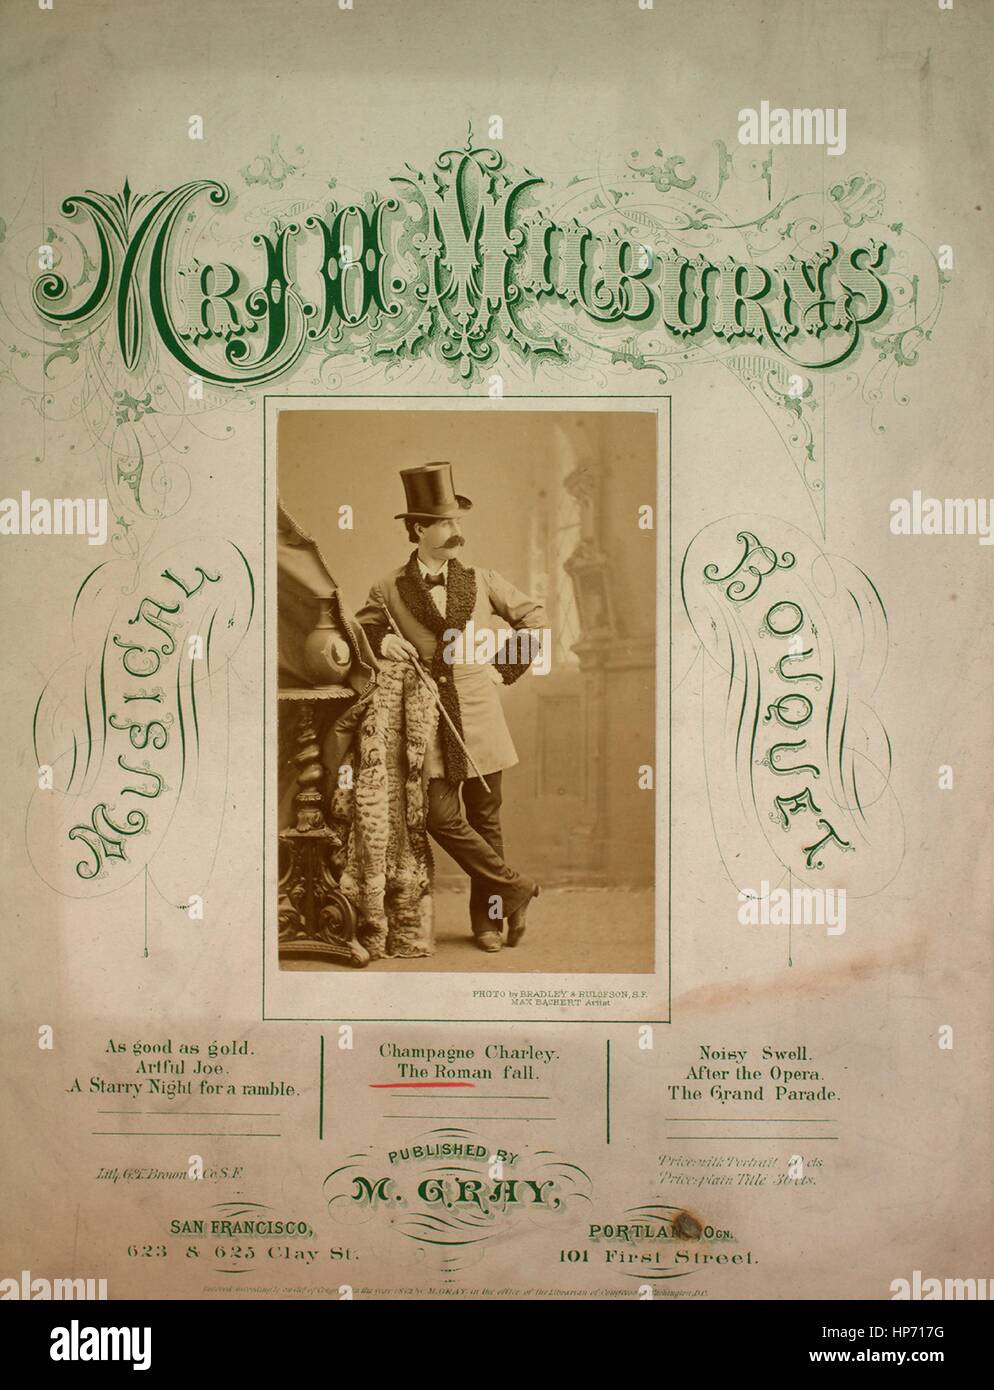 Sheet music cover image of the song 'Mr HH Milburn's Musical Bouquet The Roman Fall', with original authorship notes reading 'Music by Alfred Lee By Geo T Evans', United States, 1872. The publisher is listed as 'M. Gray, 623 and 628 Clay St.', the form of composition is 'strophic with chorus', the instrumentation is 'piano and voice', the first line reads 'The Grecian Bend for West-end Belles, is thought by Jove the thing', and the illustration artist is listed as 'Photo by Bradley and Rulofson, S.F.; Max Bachert Artist; Lith. G.F. Brown and Co. S.F.'. Stock Photo